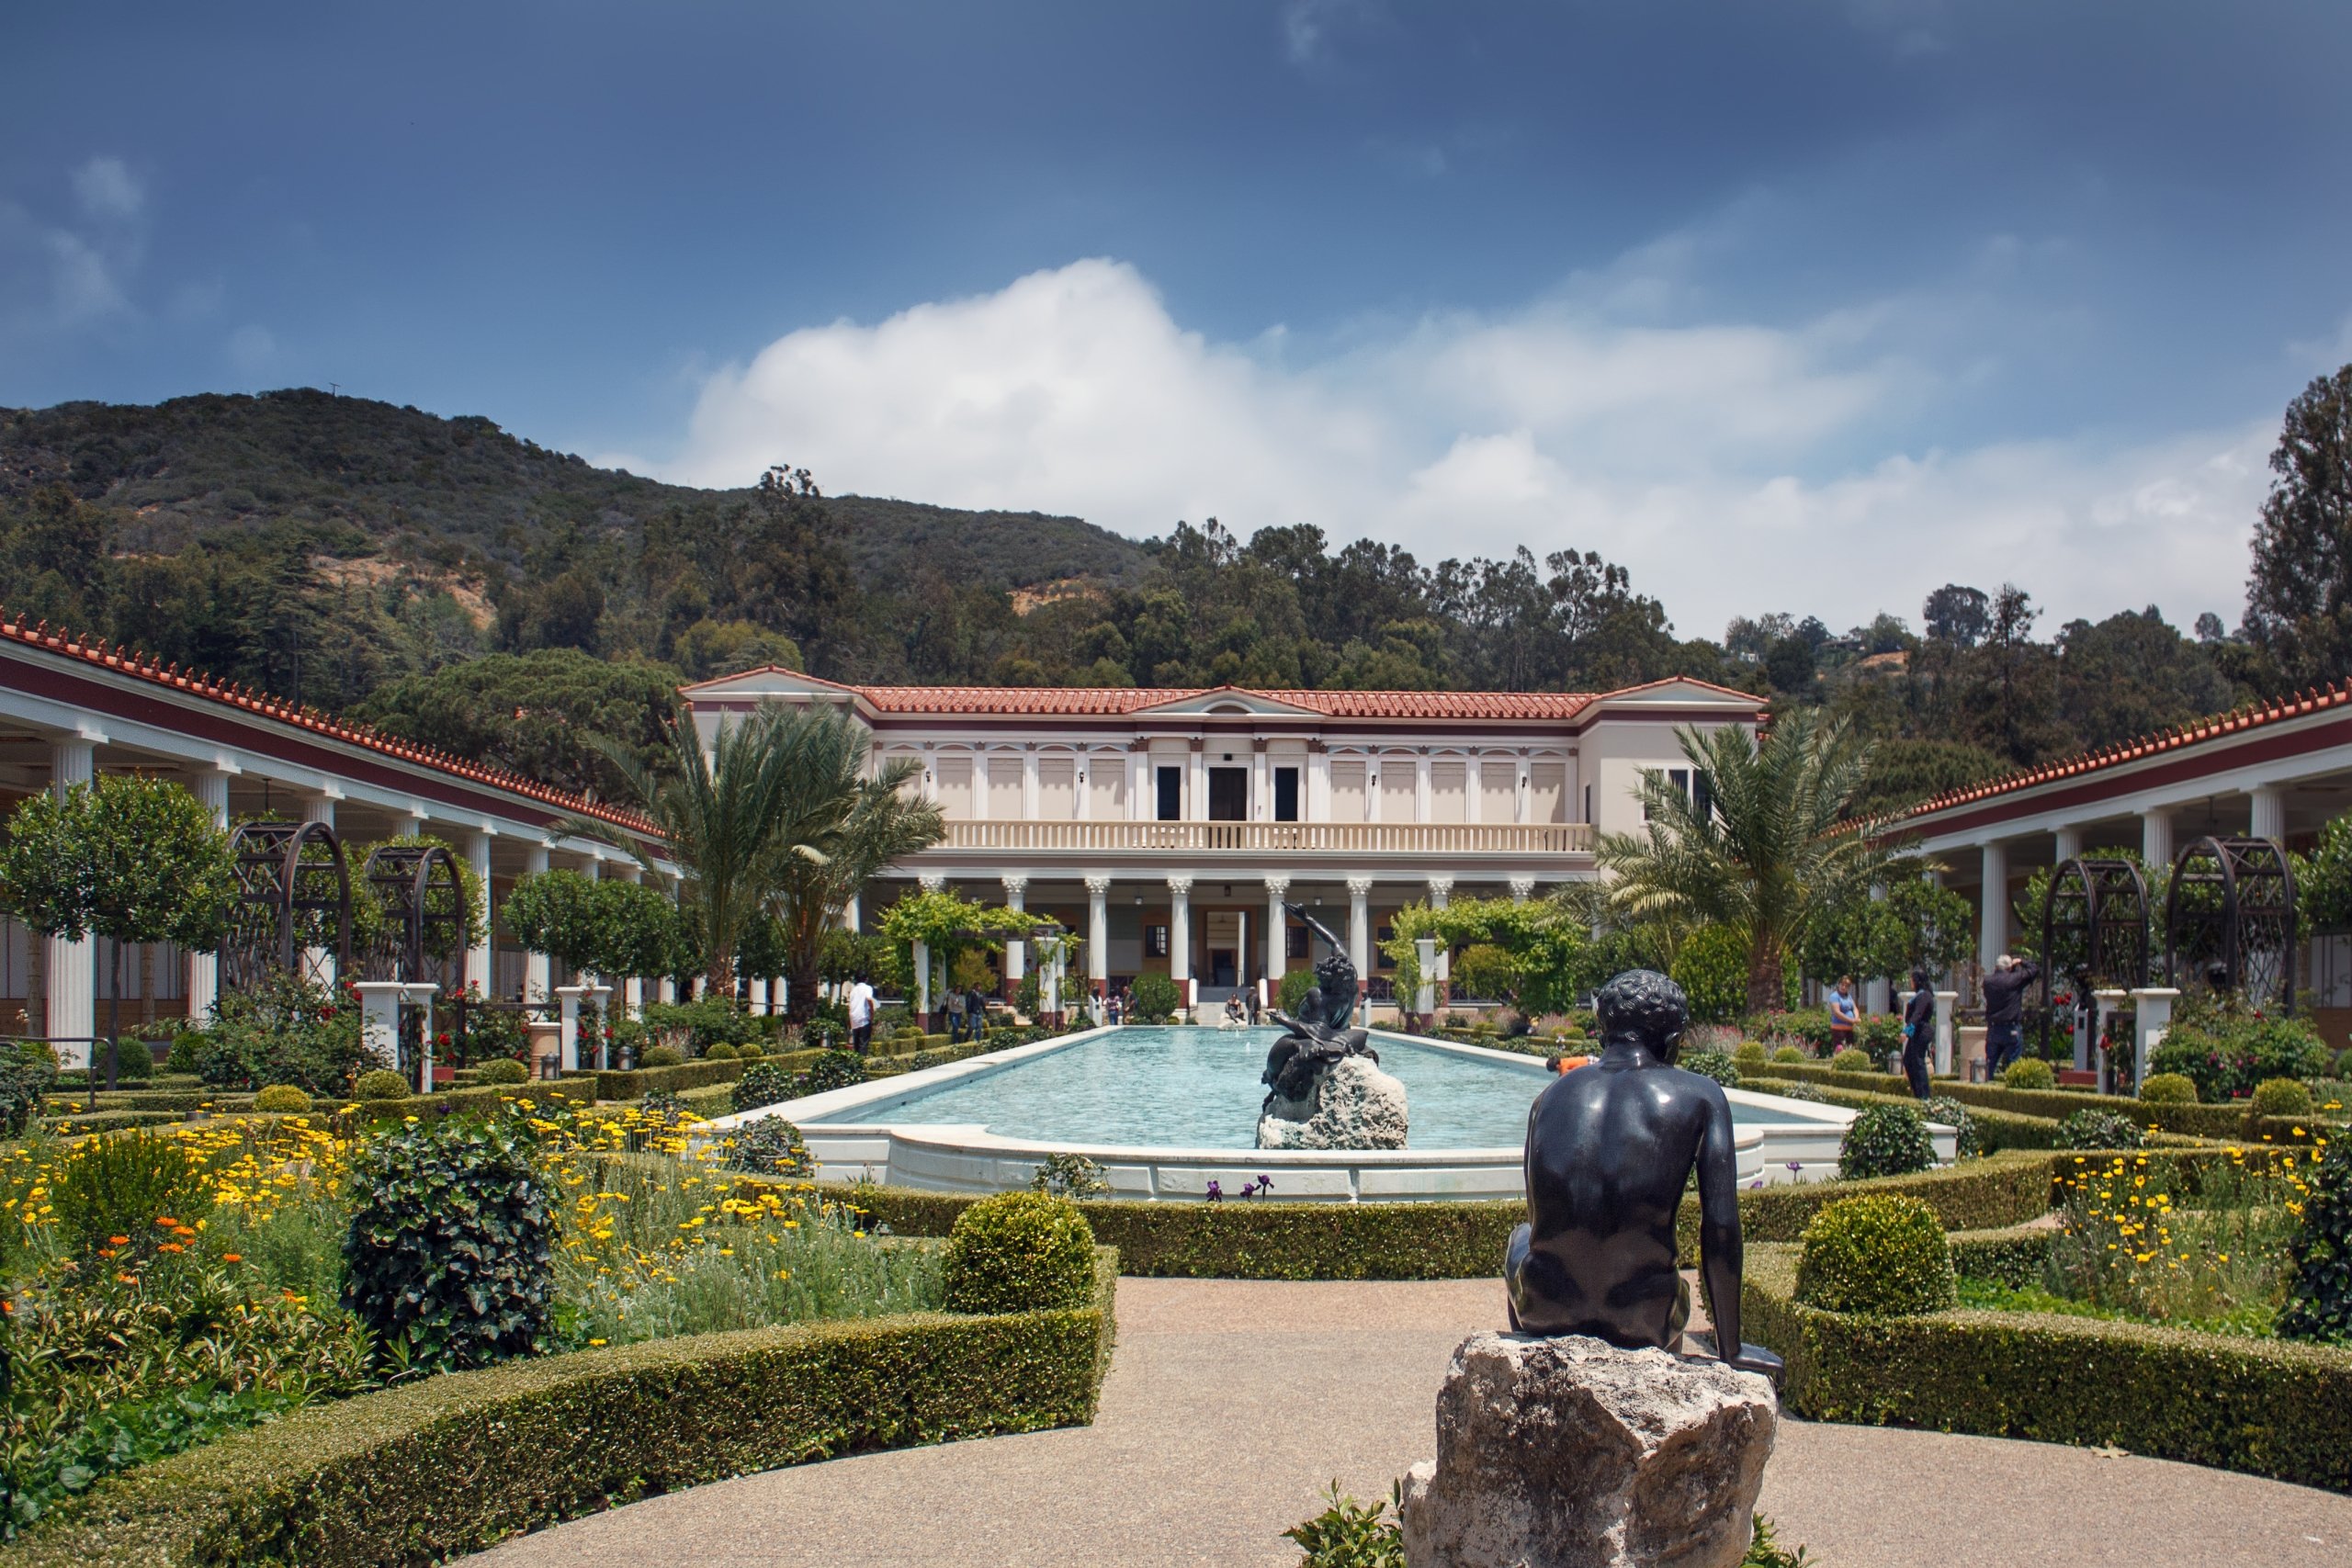 Getty Villa show casing a large outdoor pond and statues with large mountains in the background